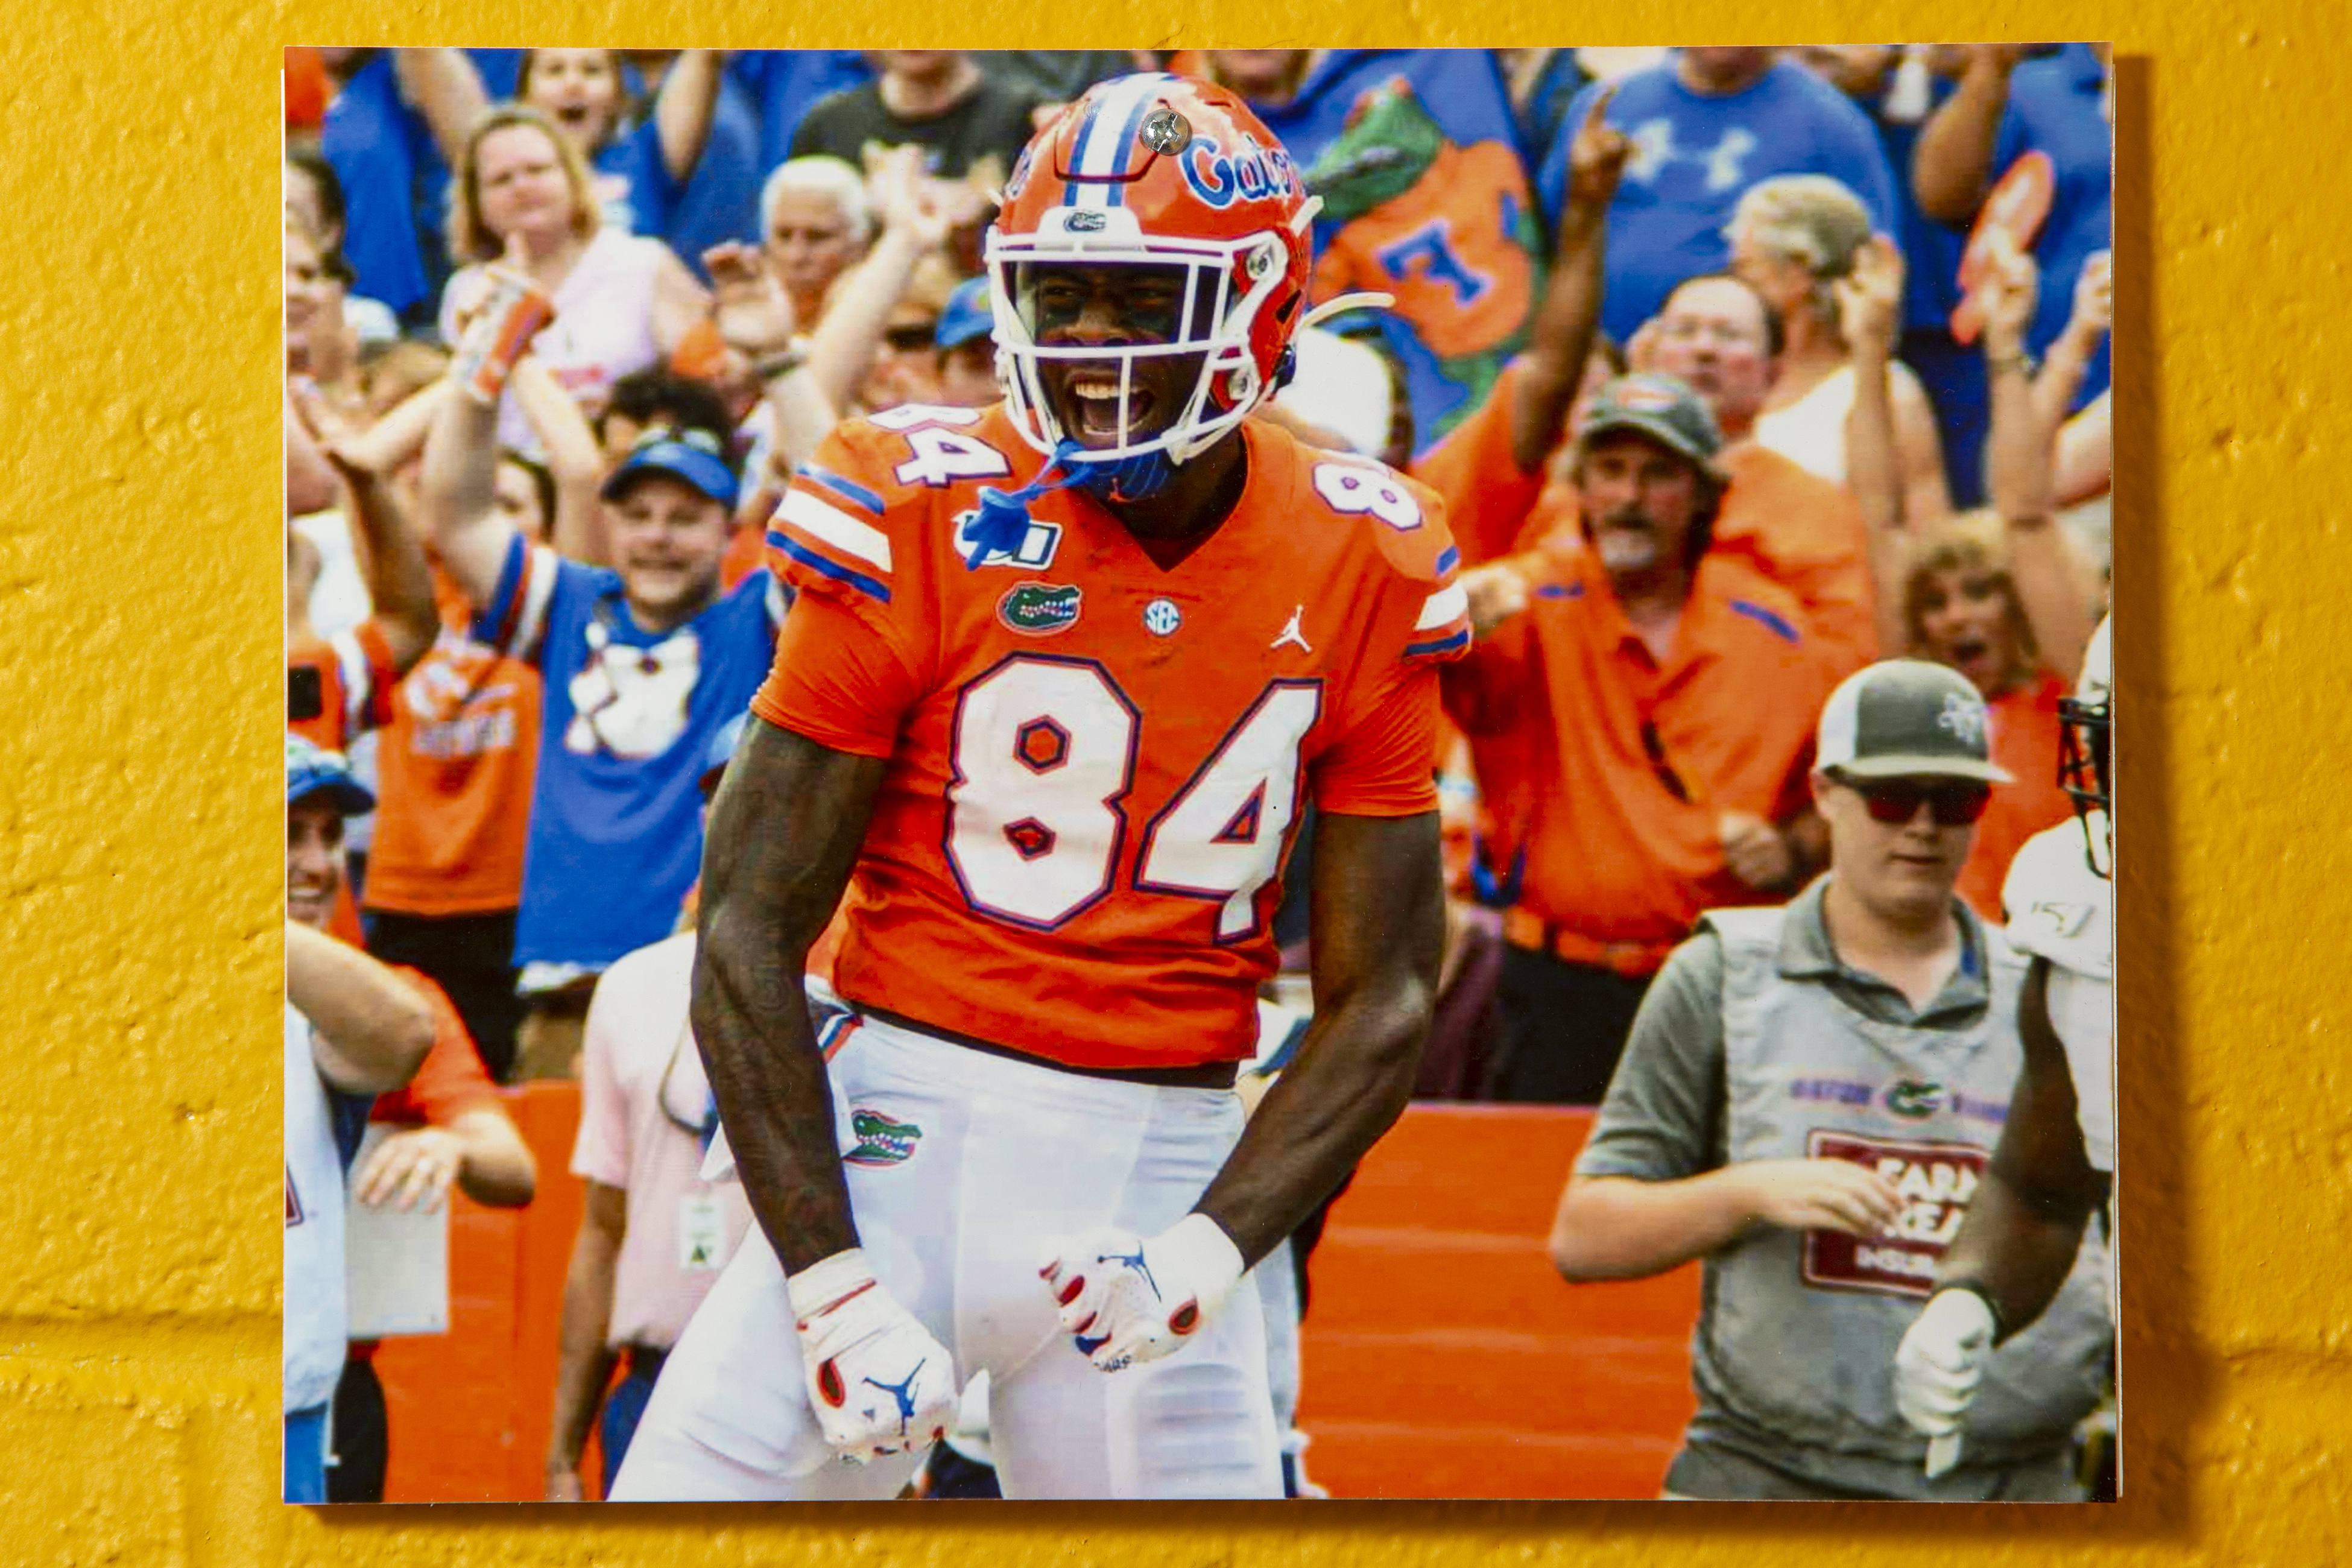 Florida's Kyle Pitts could be highest-drafted tight end in NFL history